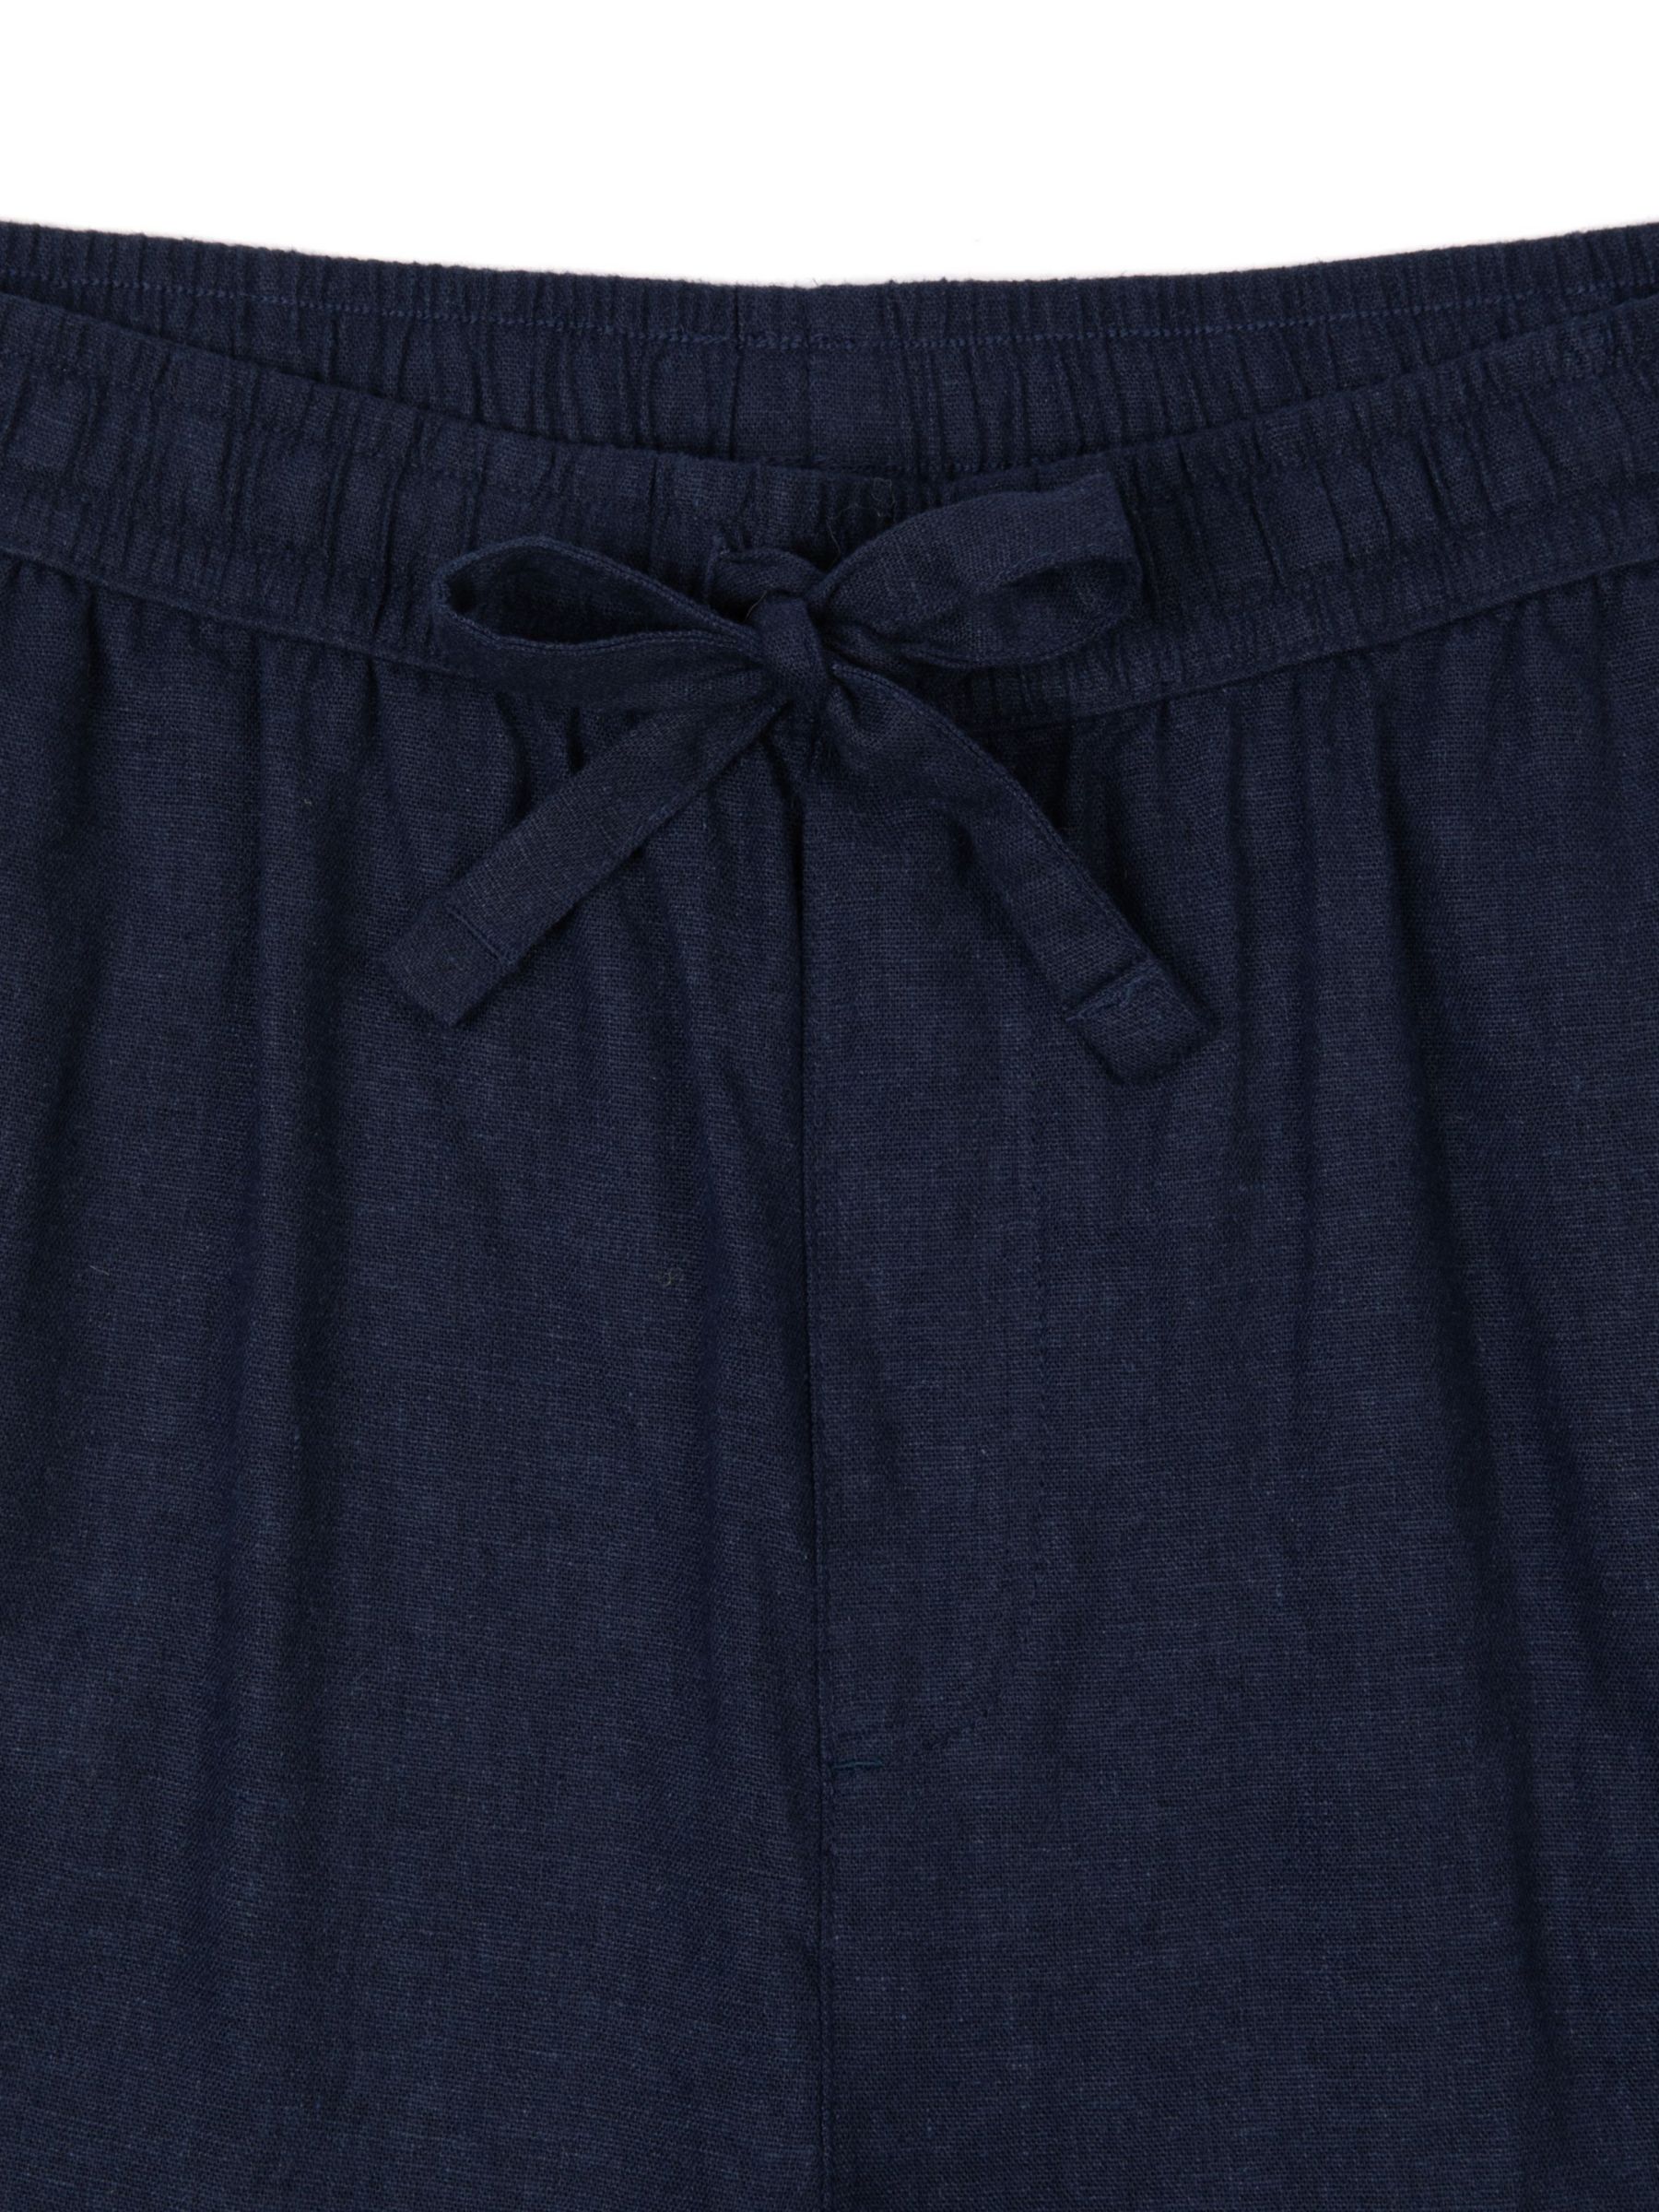 Buy Chelsea Peers Linen Blend Relaxed Trousers, Navy Online at johnlewis.com